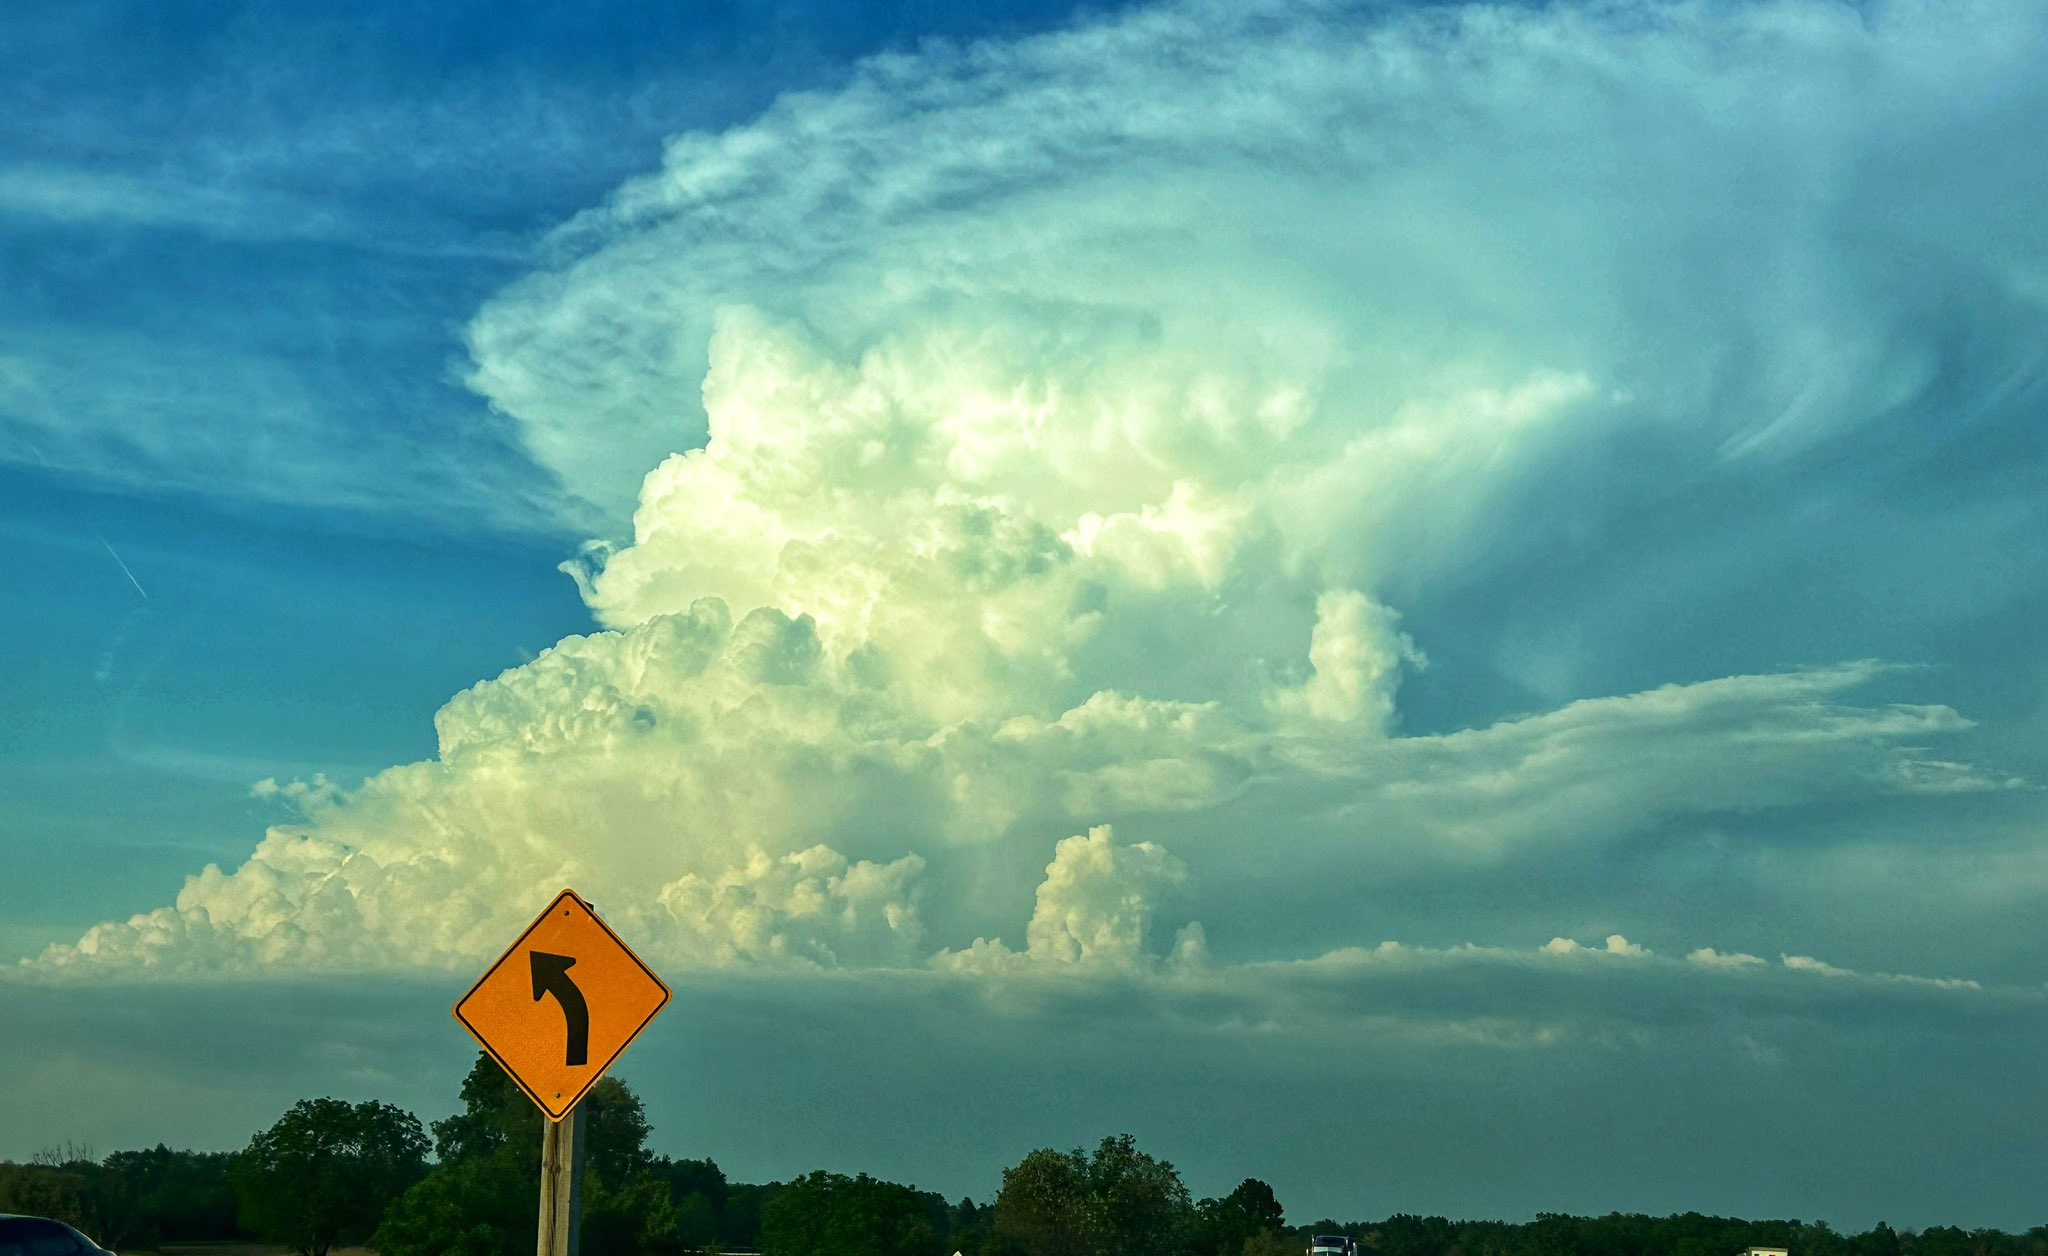 How the atmosphere bakes a perfect thunderstorm